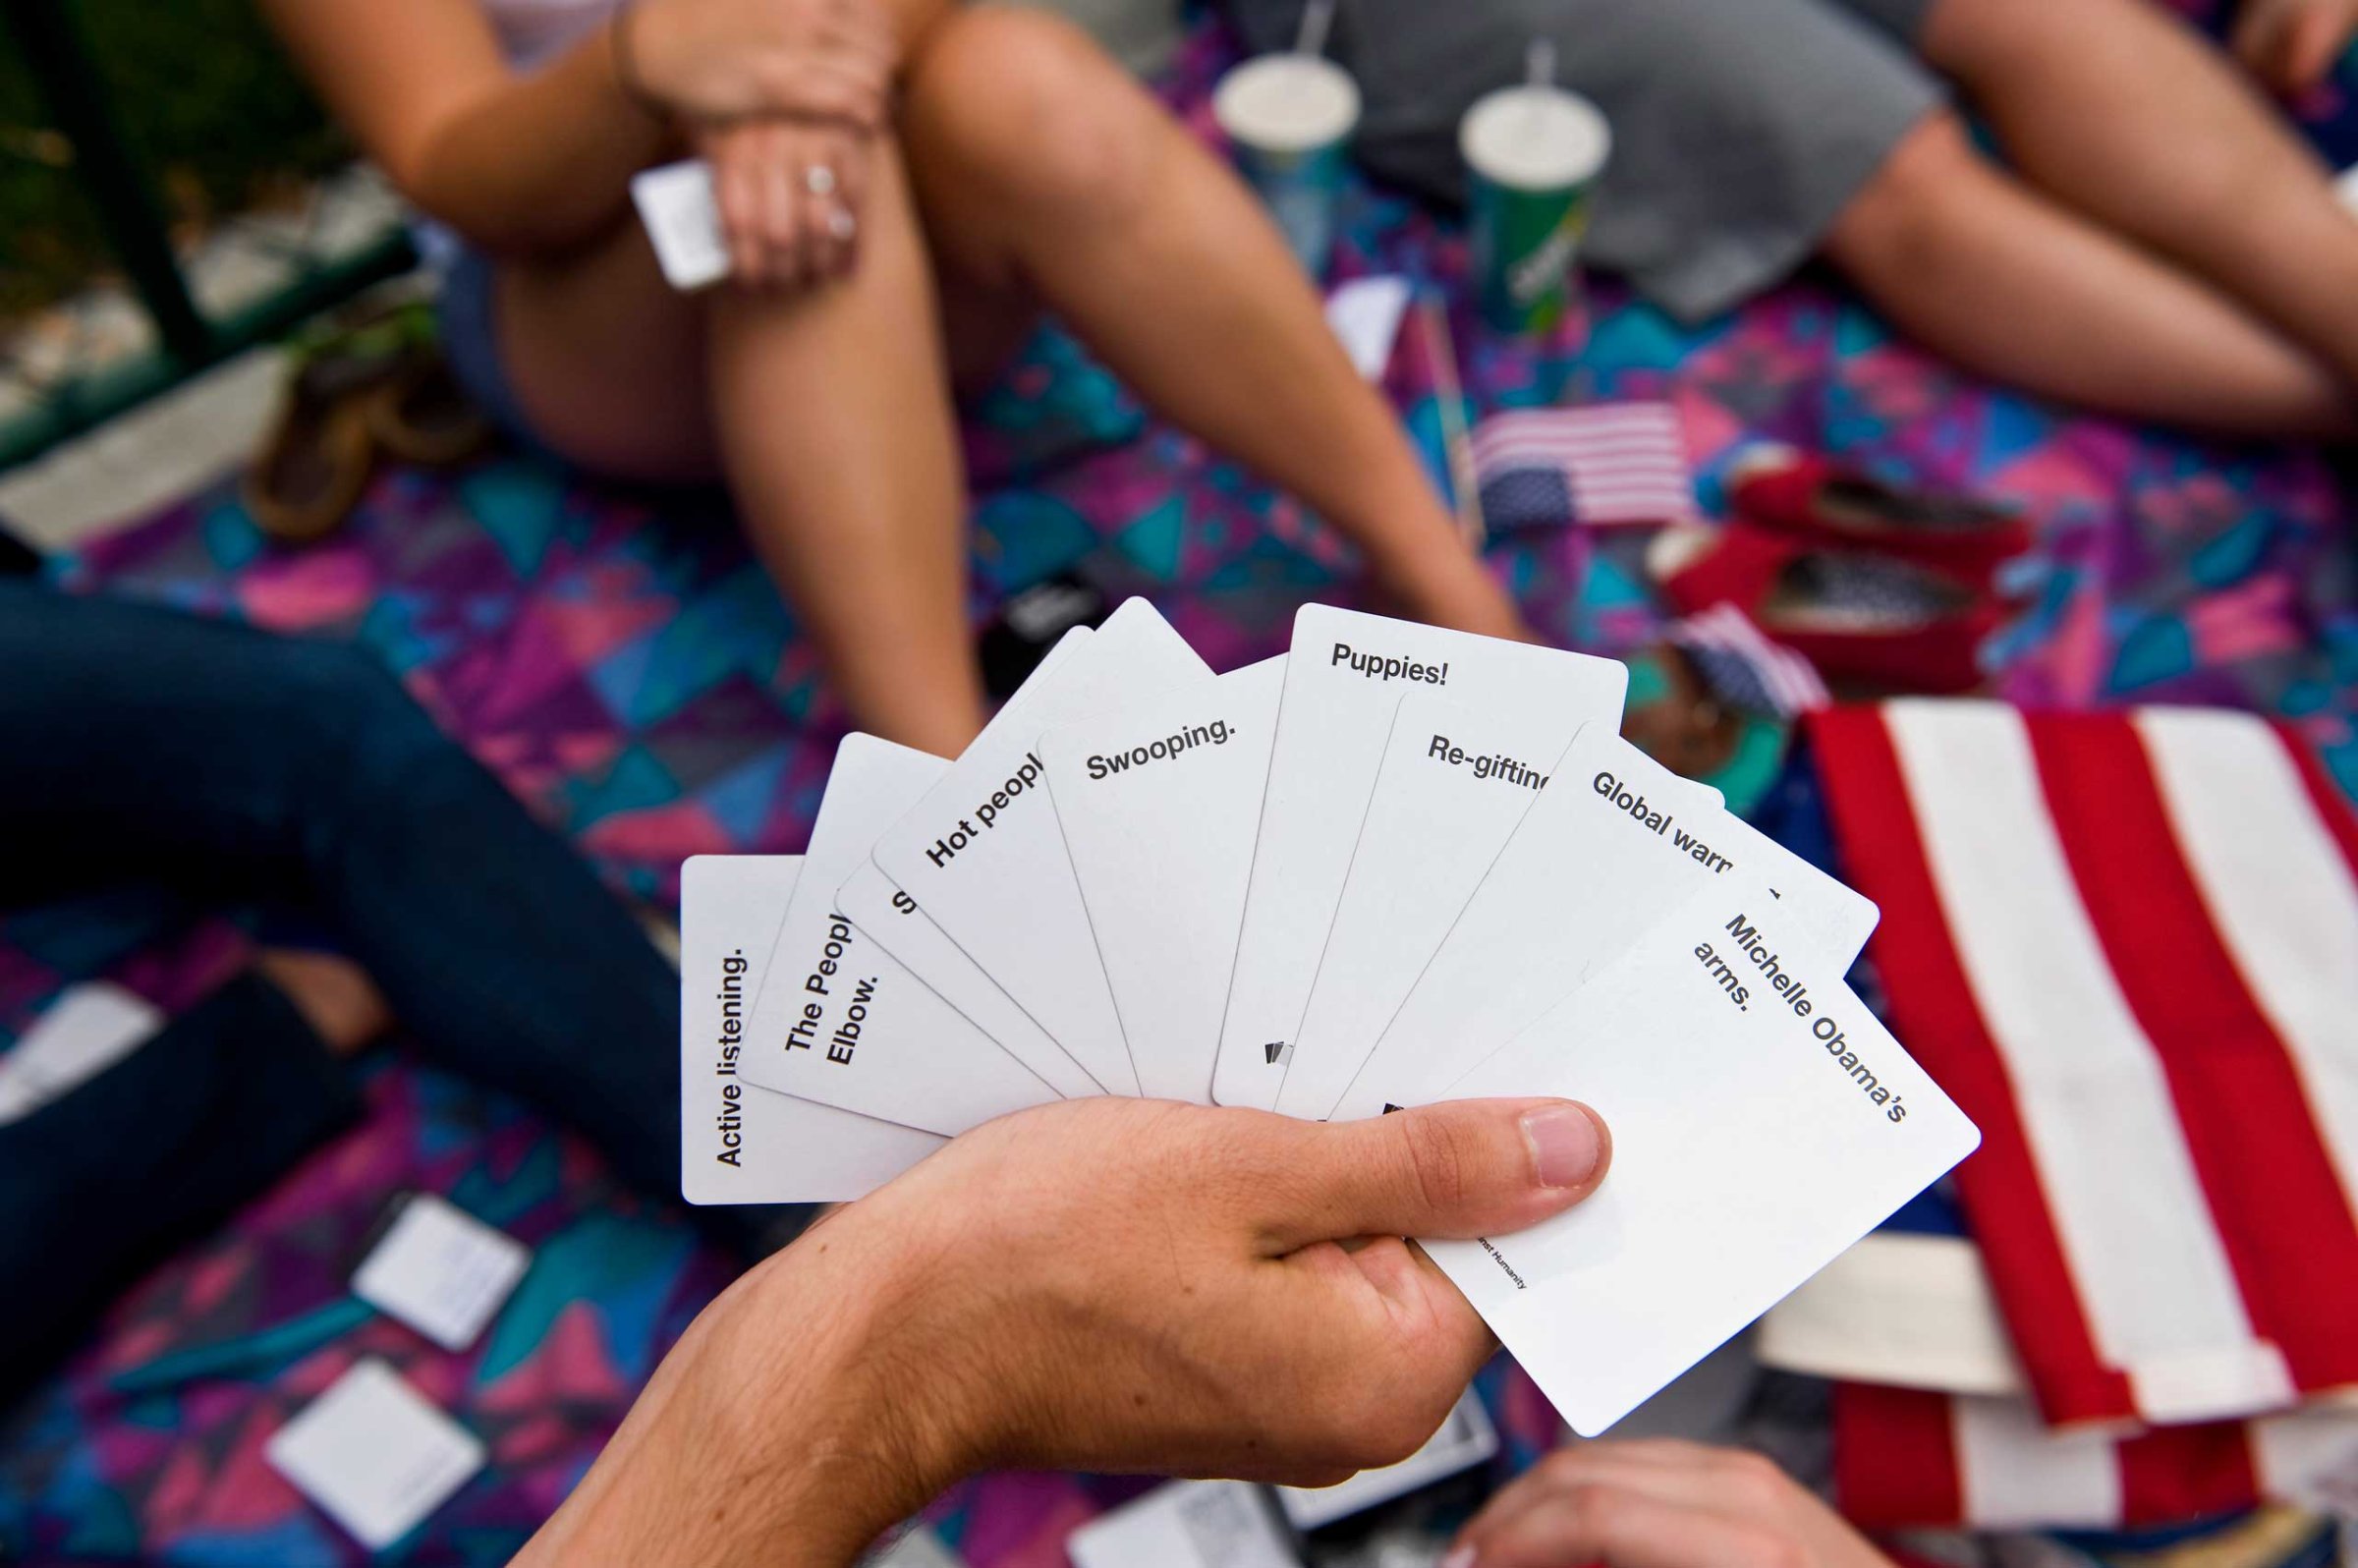 Students play Cards Against Humanity in Denver, Colorado in 2012.